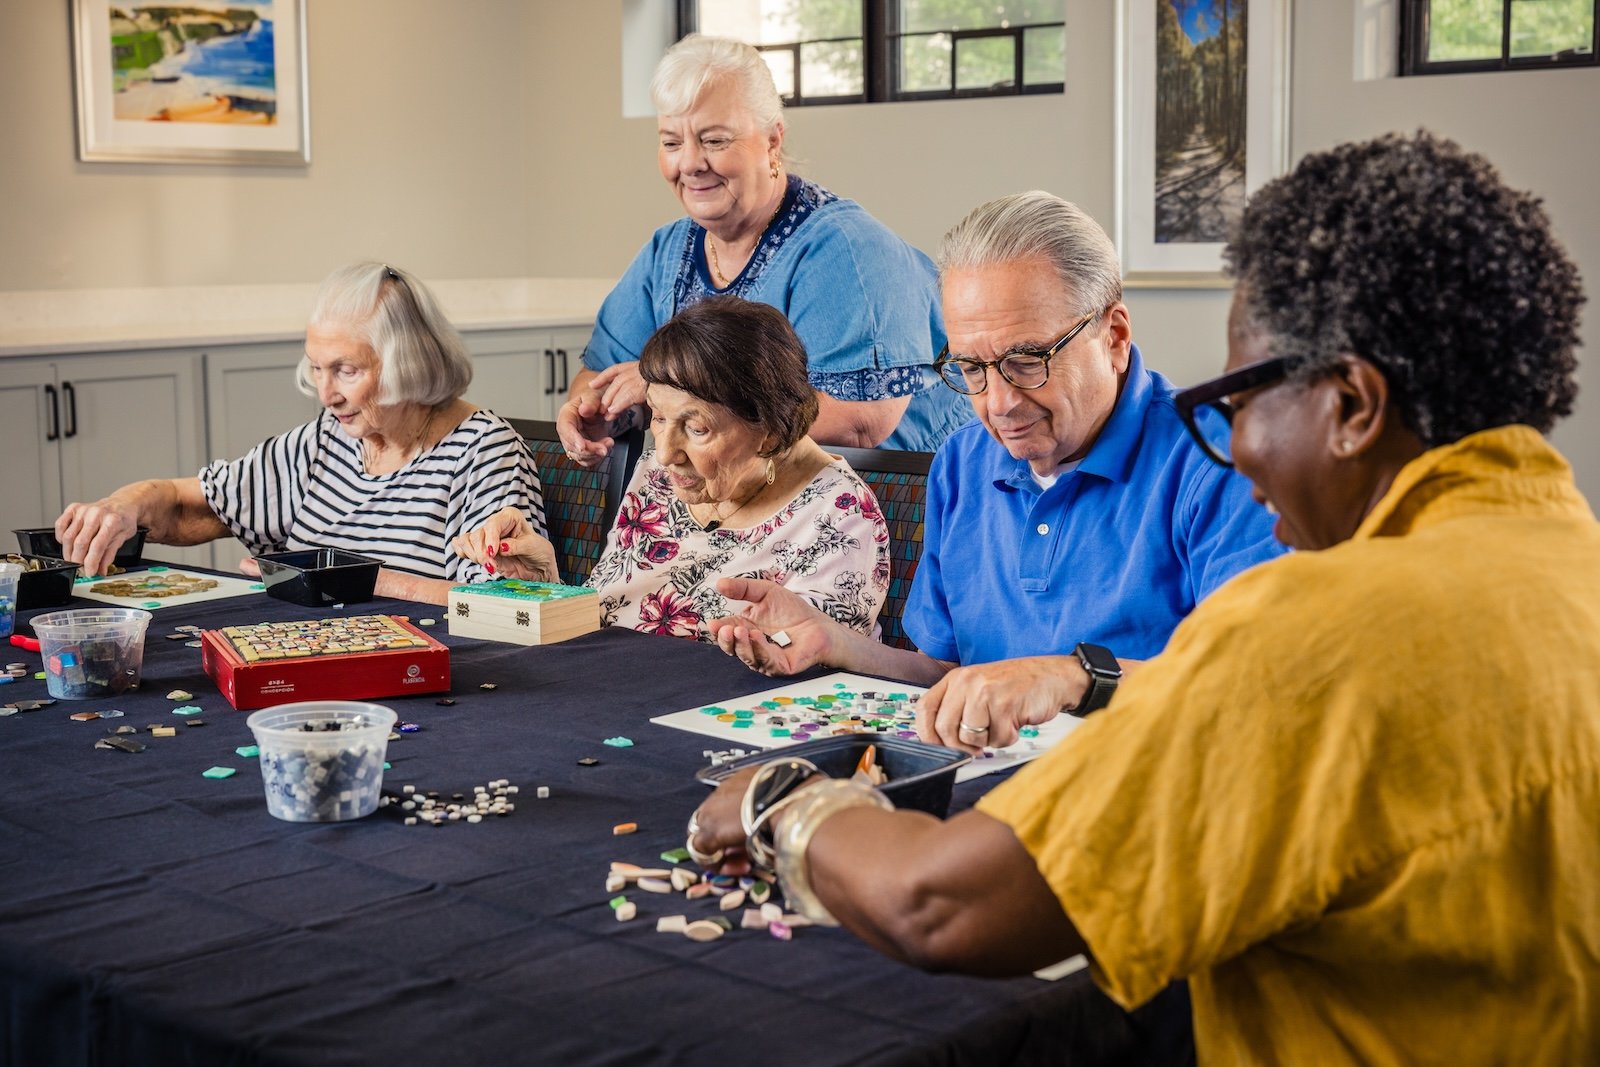 Spring Mill Pointe residents playing board games